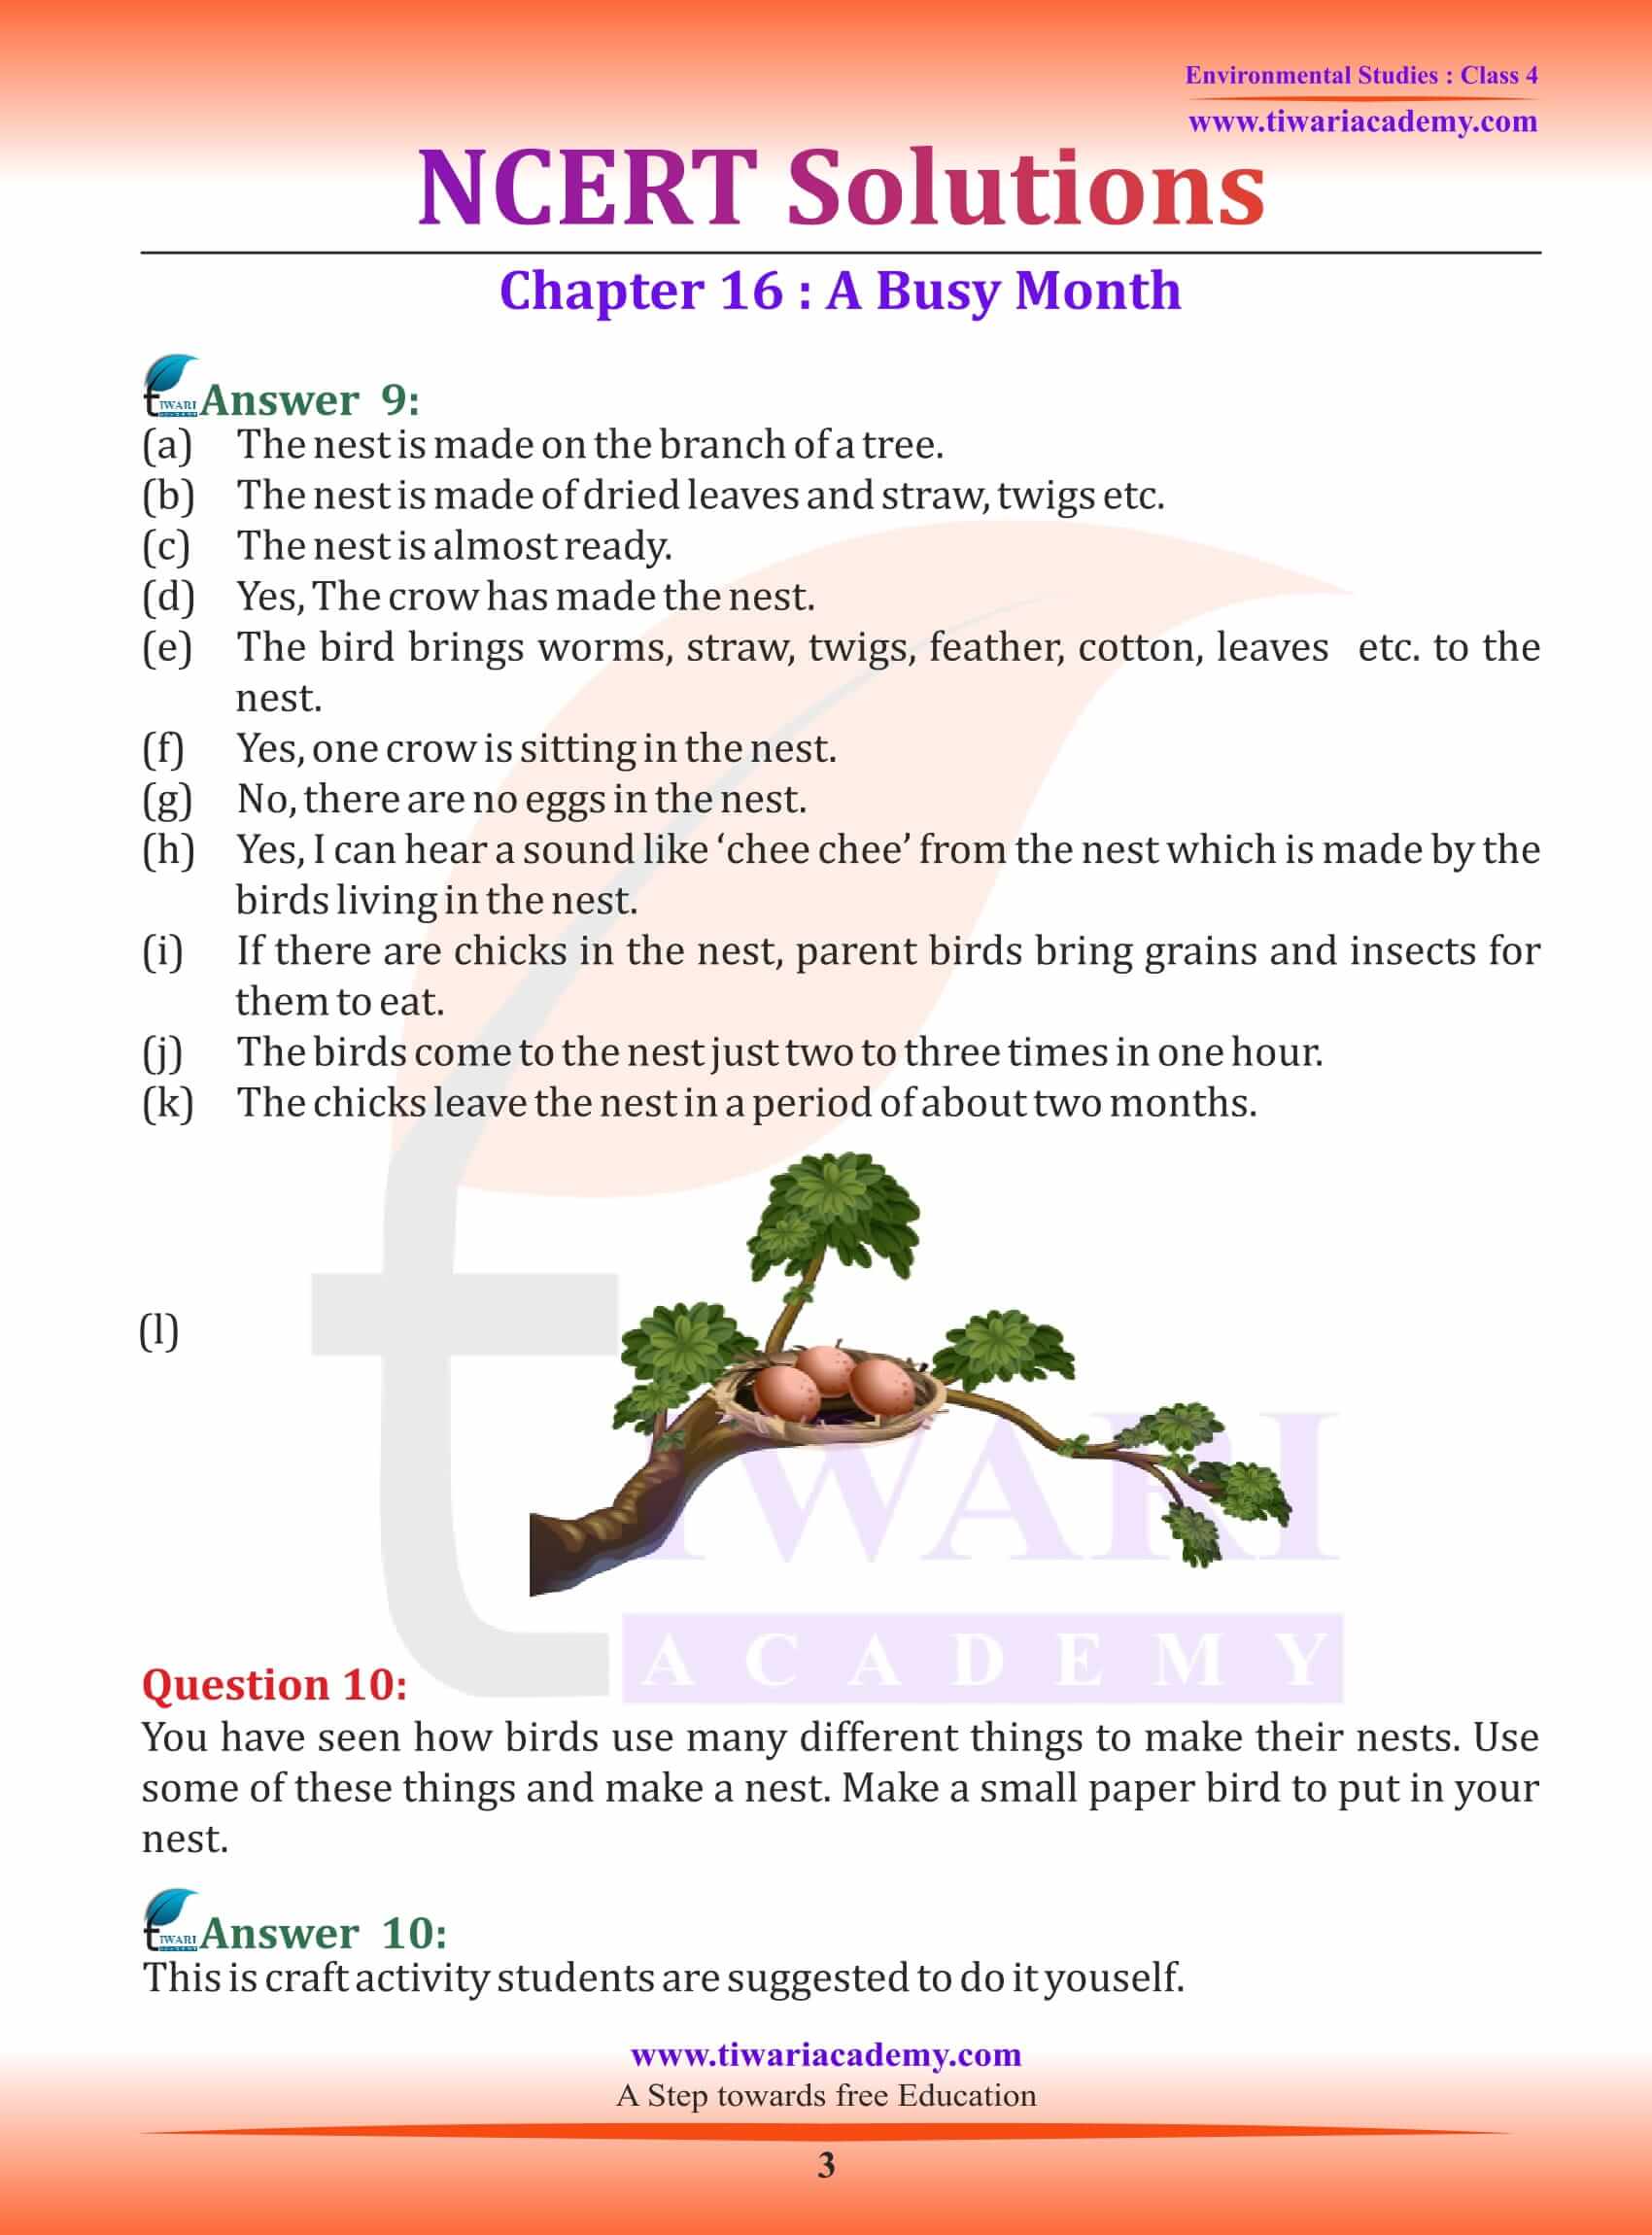 NCERT Solutions for Class 4 EVS Chapter 16